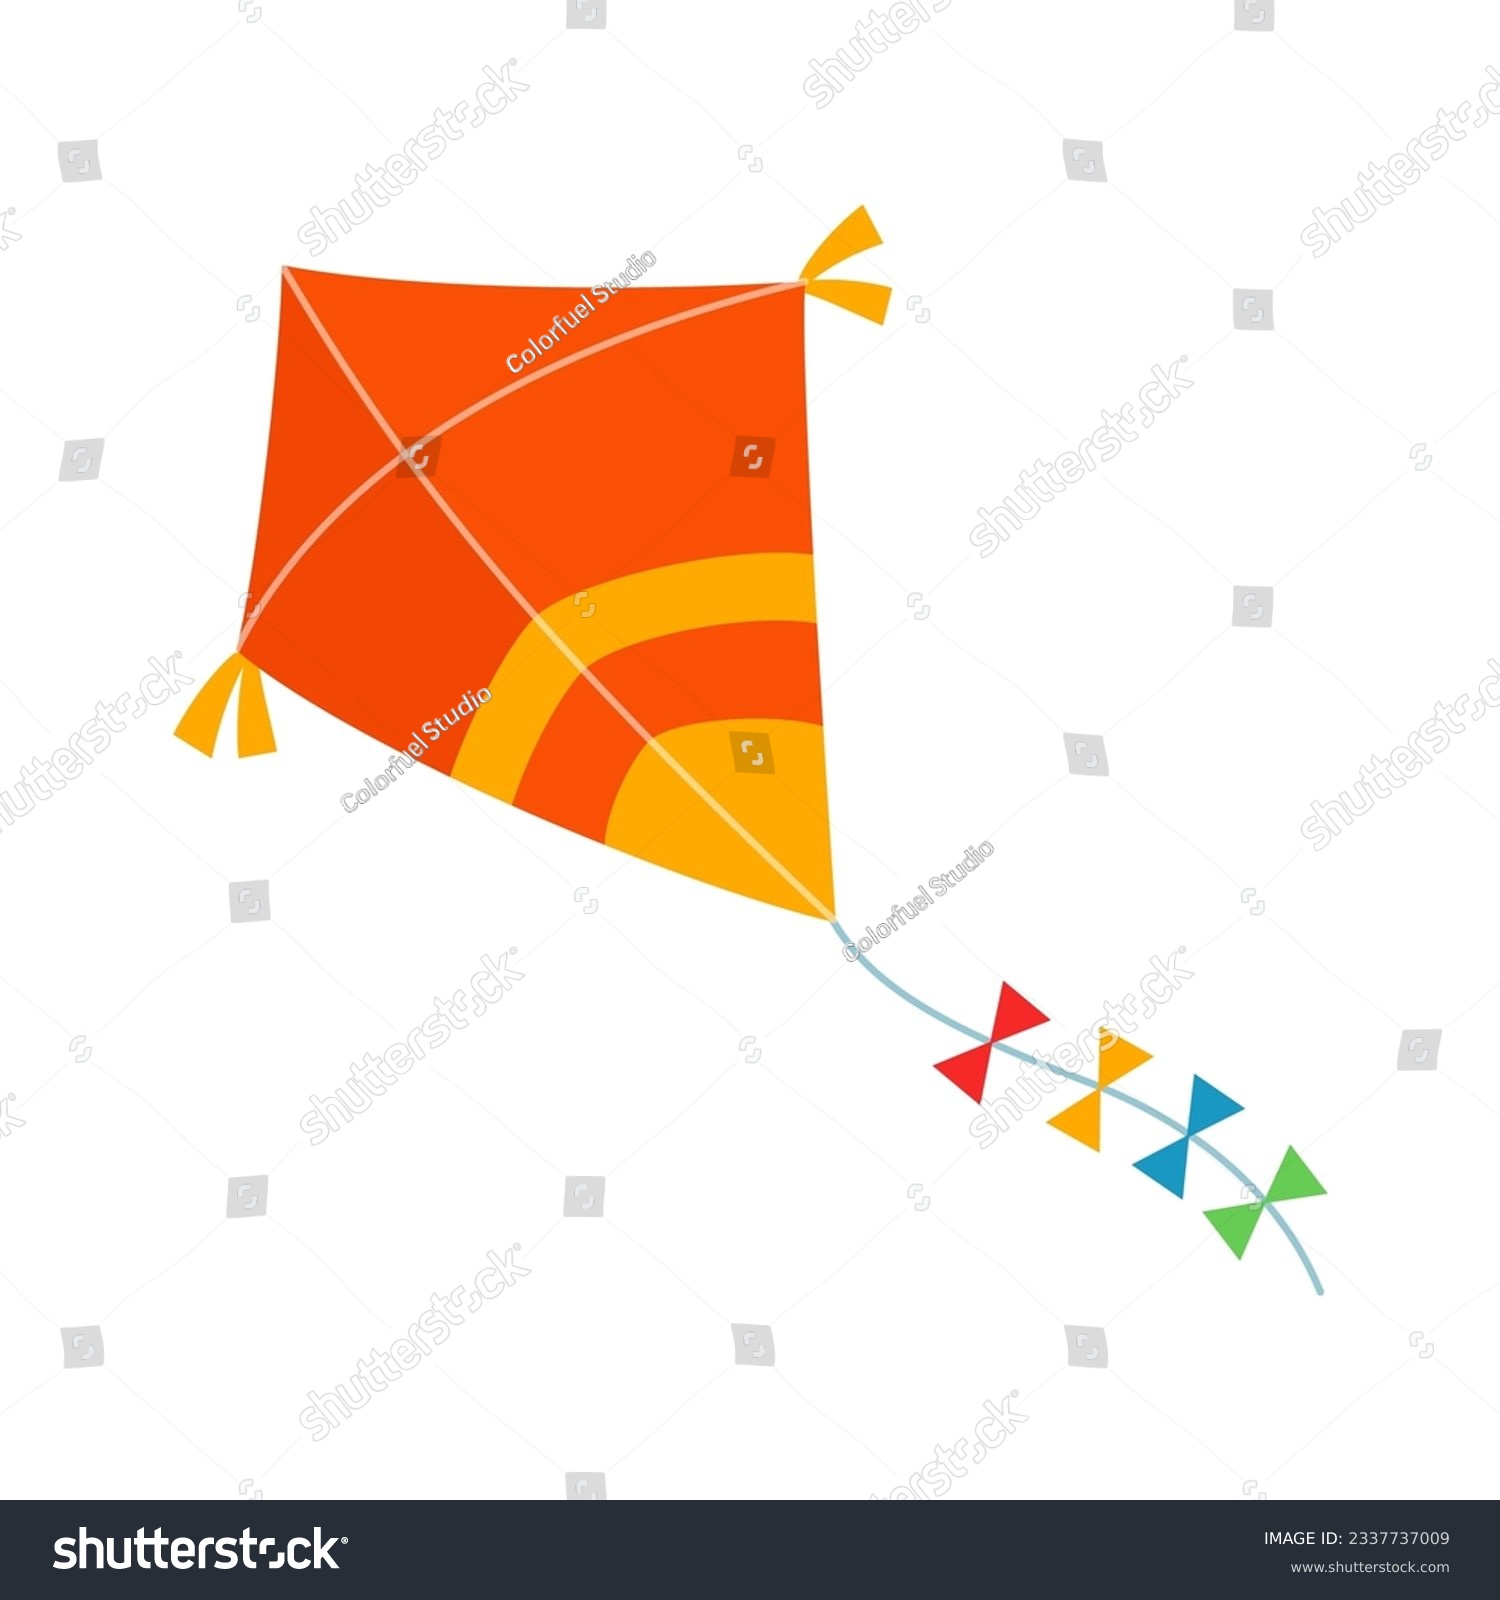 SVG of kite toy fly with good quality and good design svg